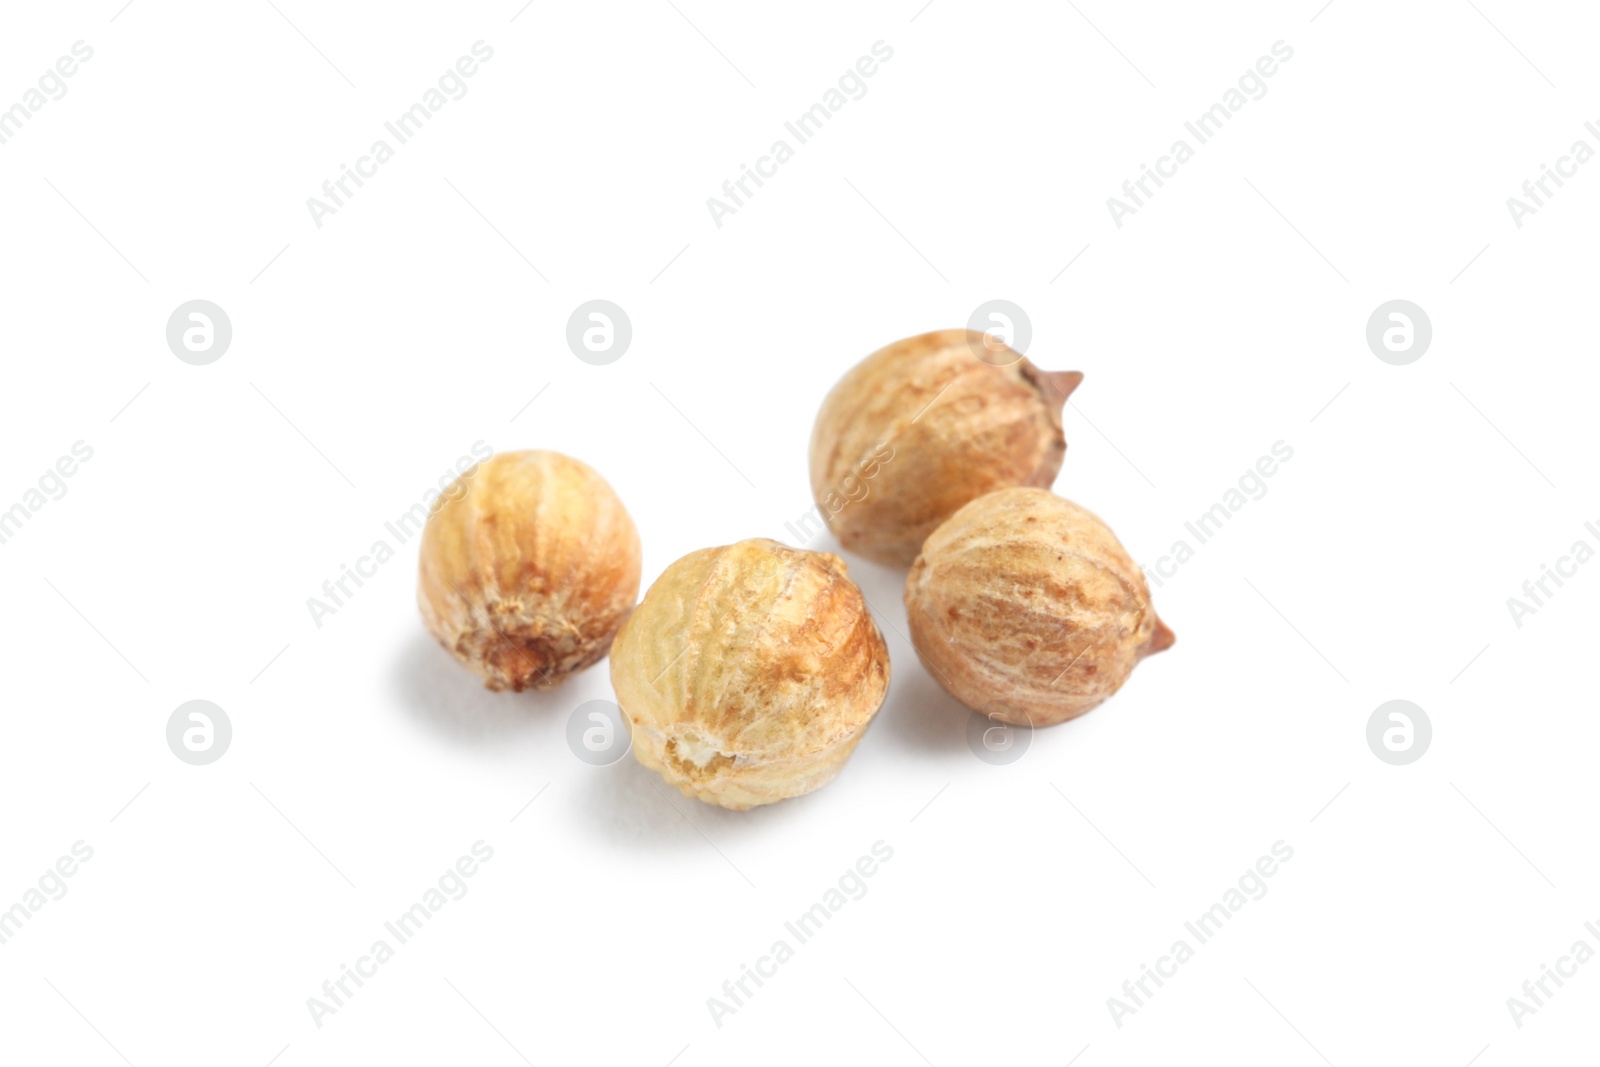 Photo of Scattered dried coriander seeds on white background